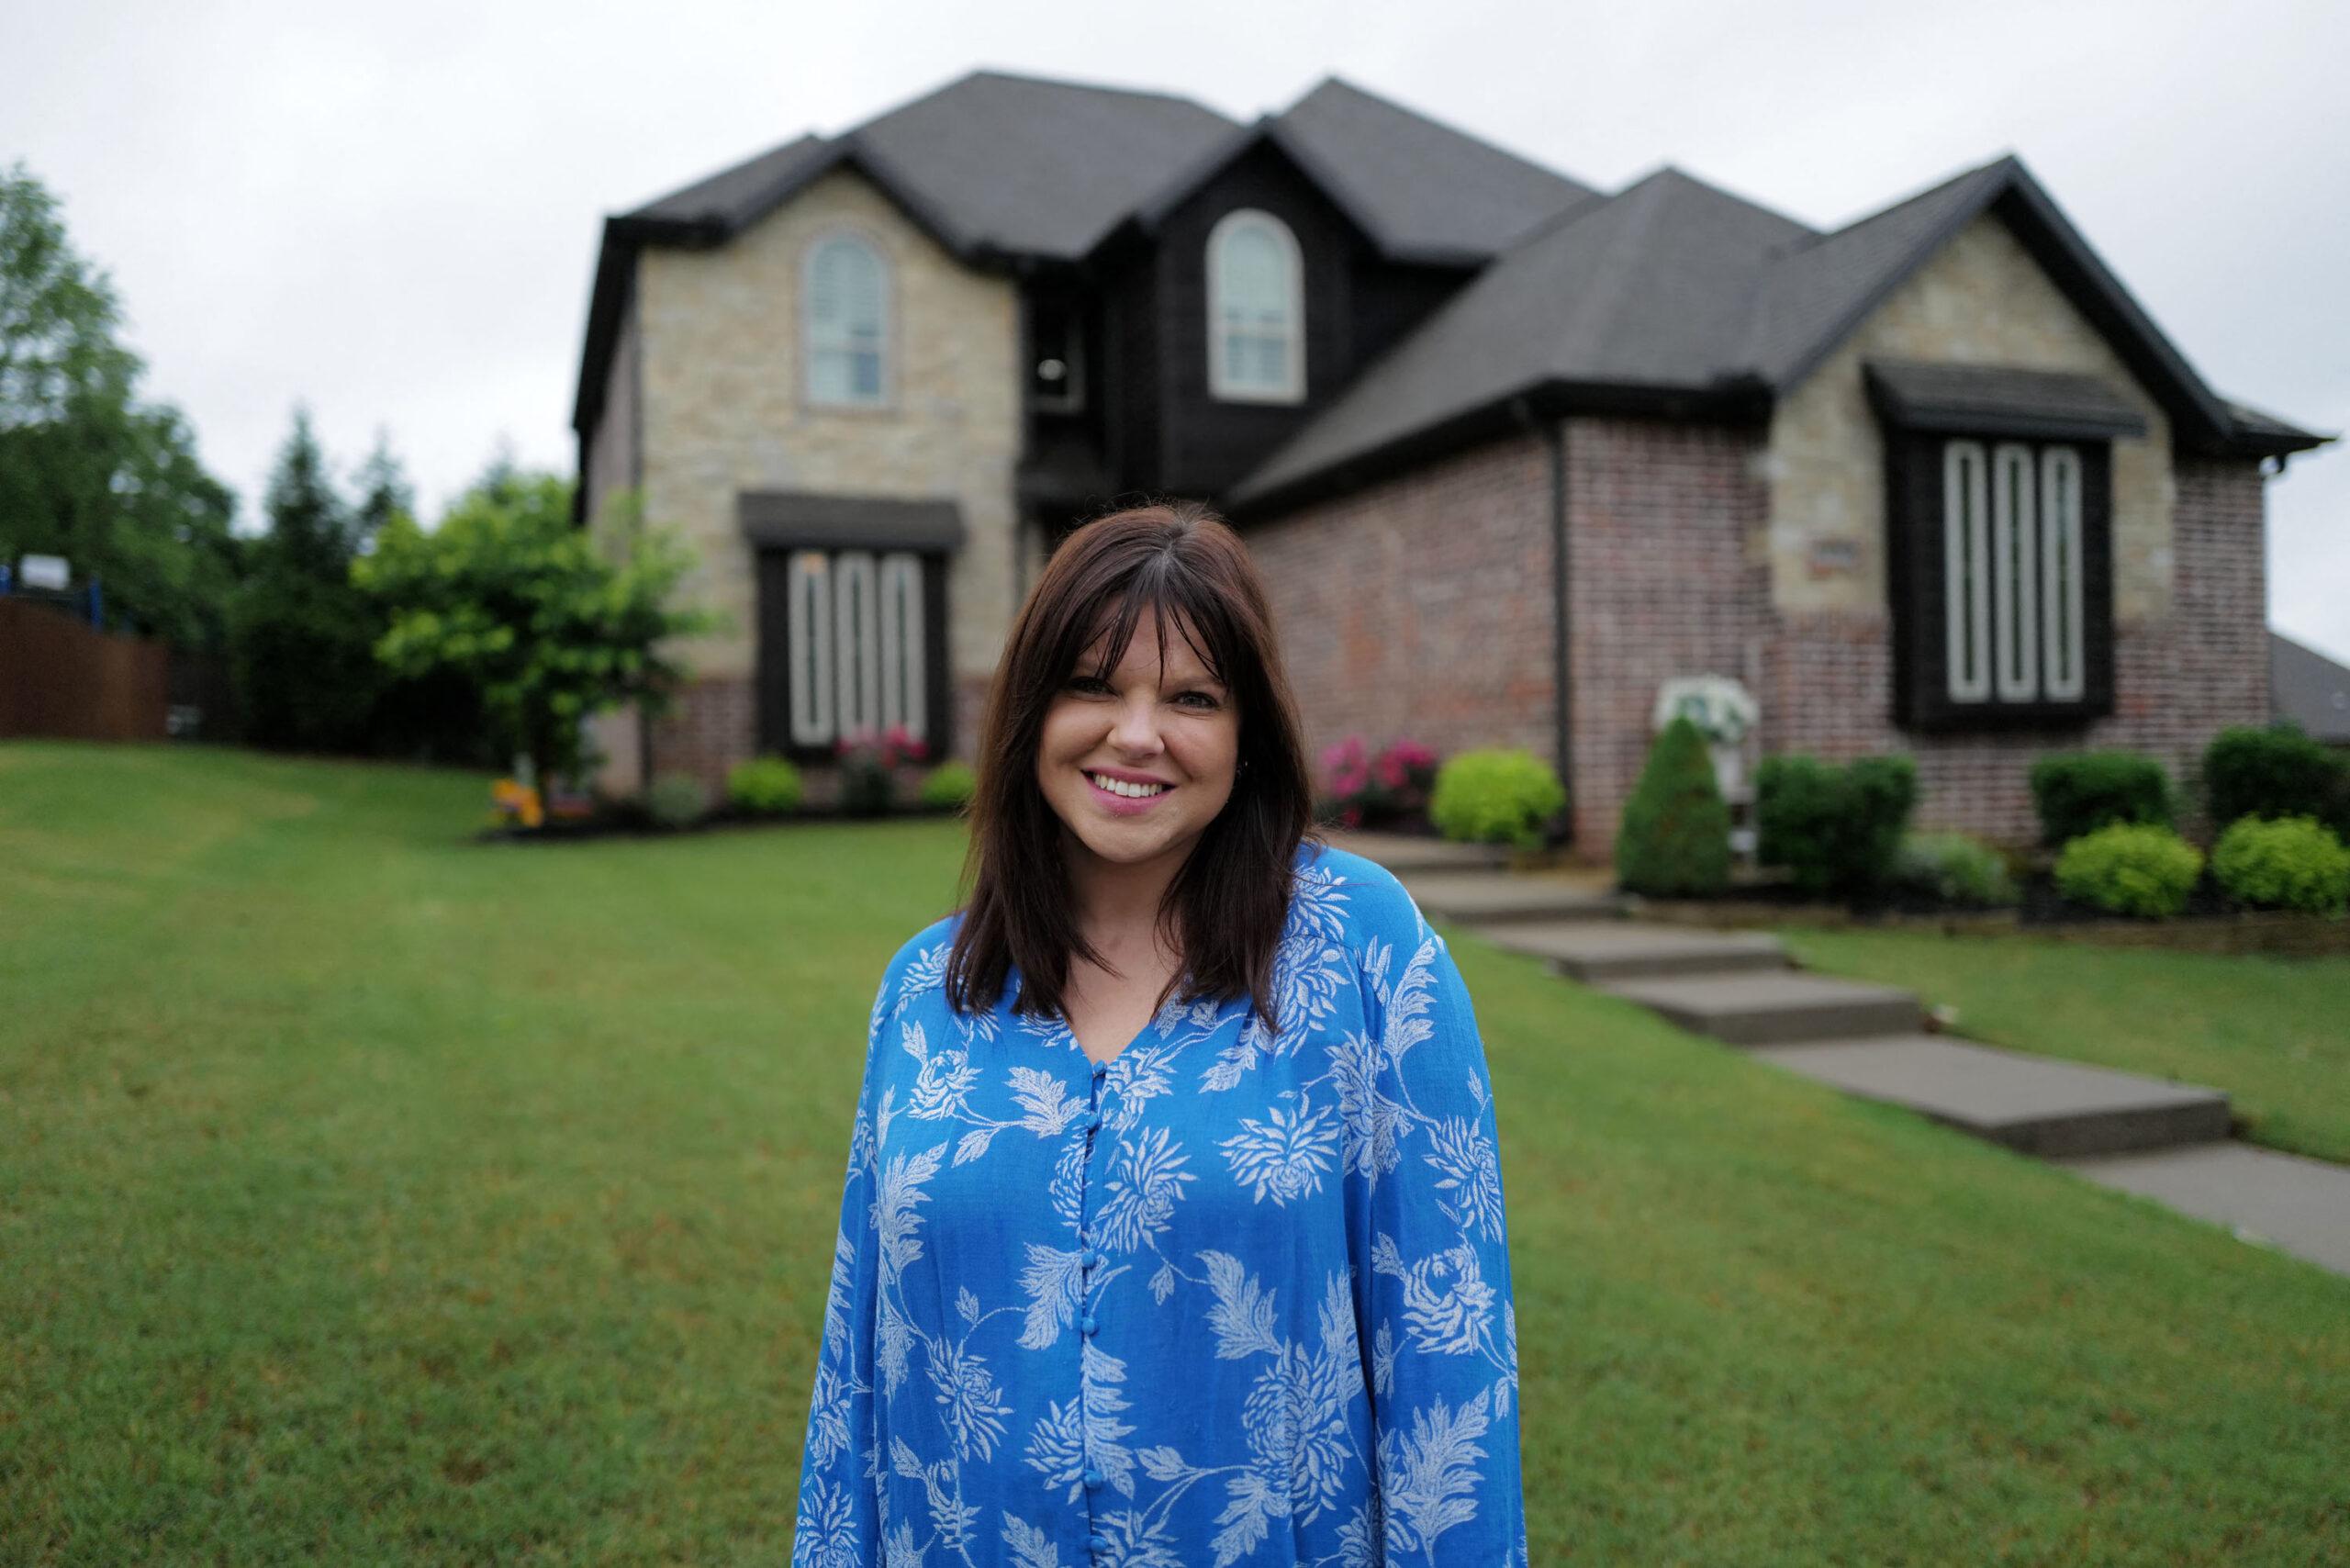 Amy Duggar King is pictured at her home in Rogers, Arkansas.